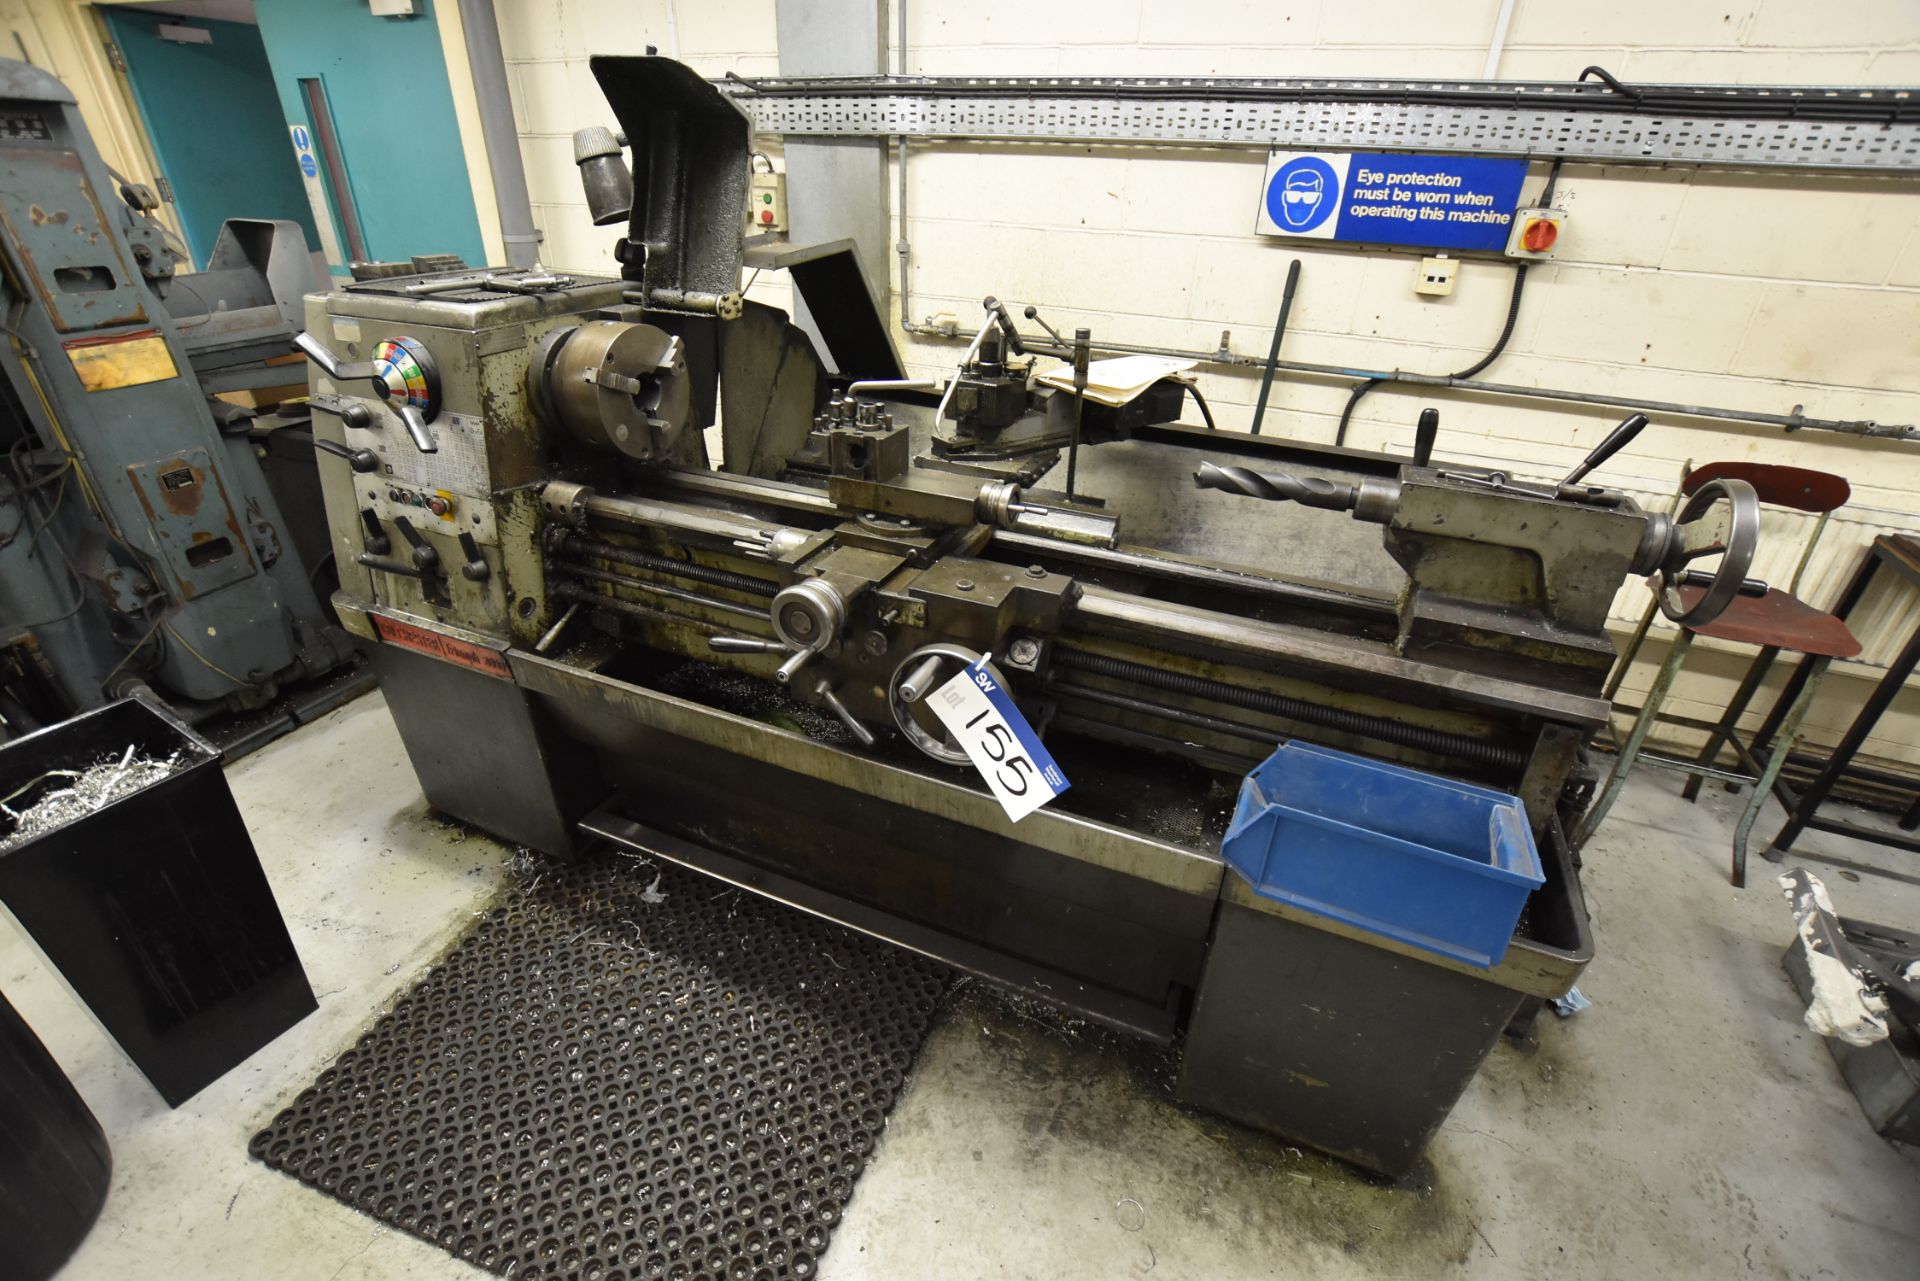 Colchester Triumph 2000 Centre Lathe, distance between centres 1270mm, swing over bed = 380mm, cross